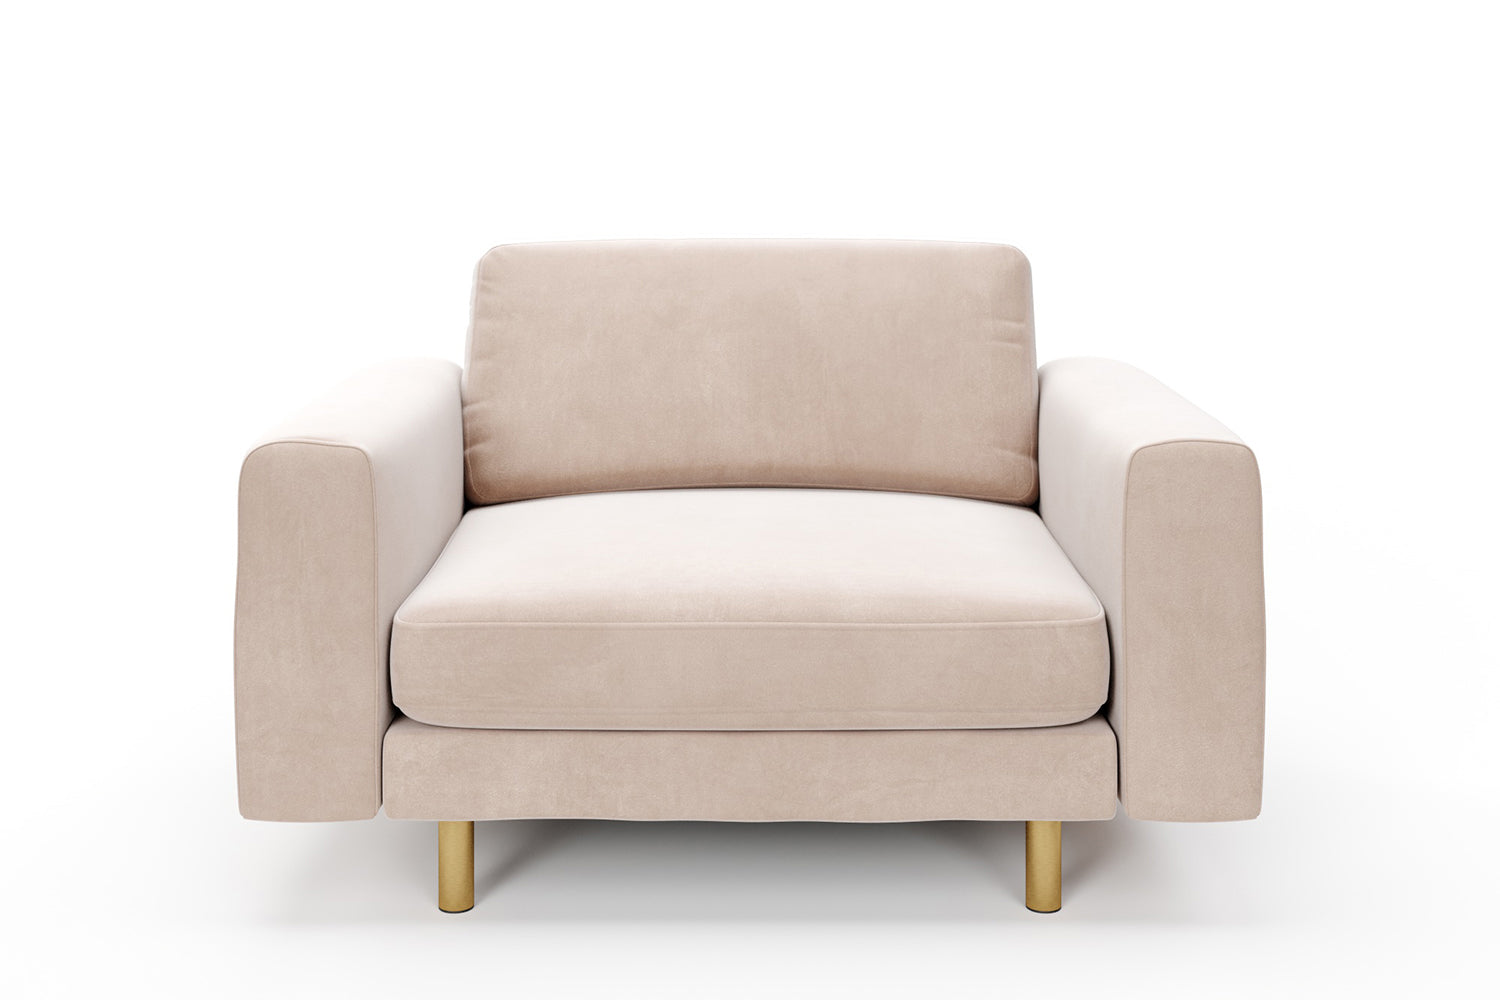 SNUG | The Big Chill 1.5 Seater Snuggler in Taupe variant_40414876401712